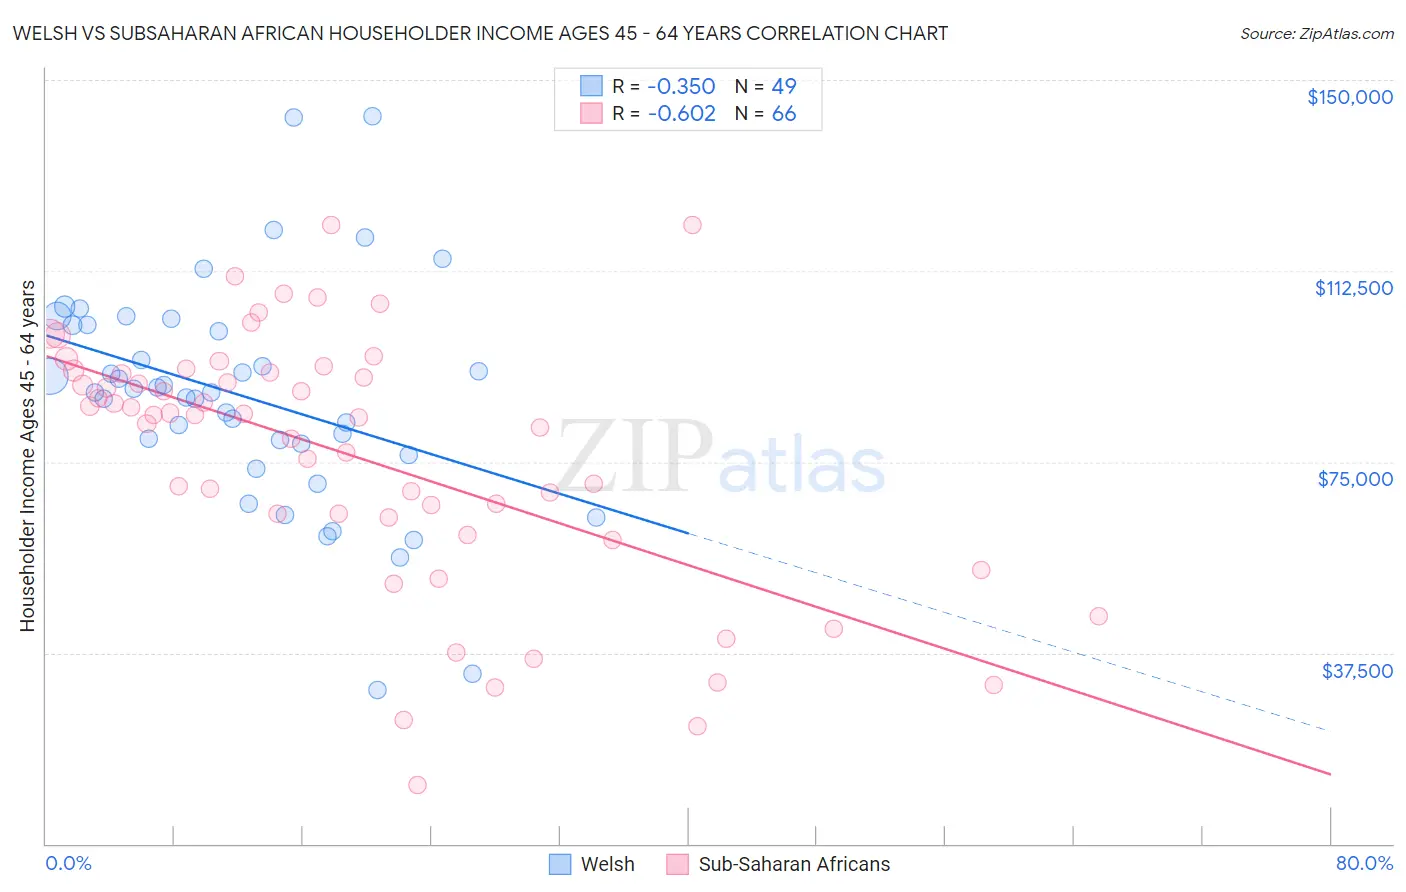 Welsh vs Subsaharan African Householder Income Ages 45 - 64 years